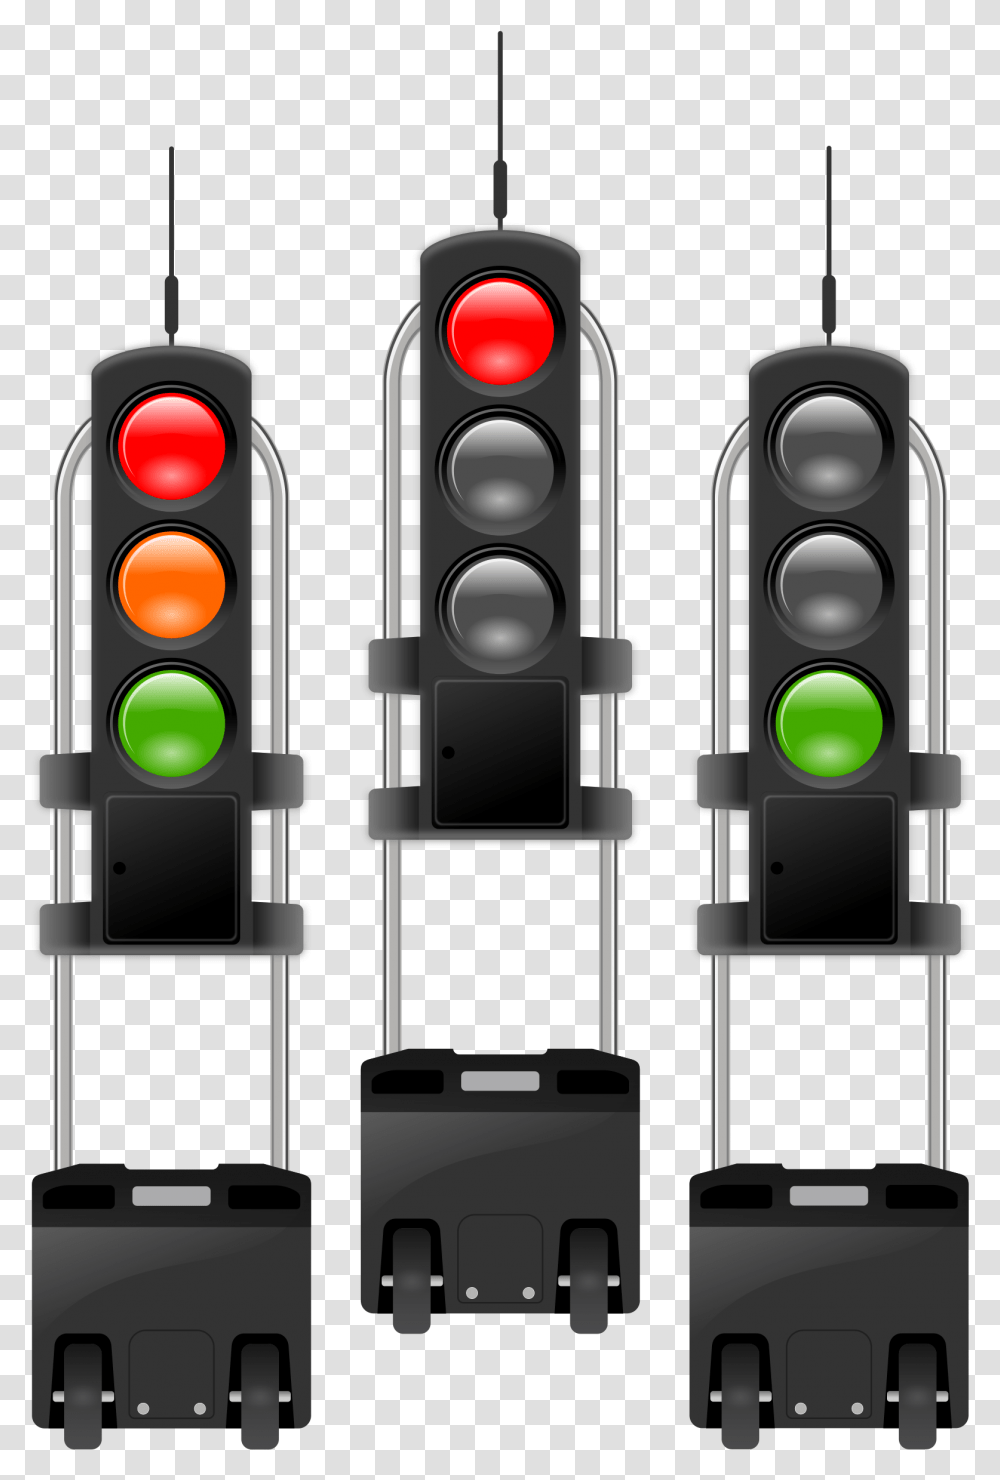 Mobile Traffic Lights Threesome Clip Arts Traffic Light Mobile Transparent Png